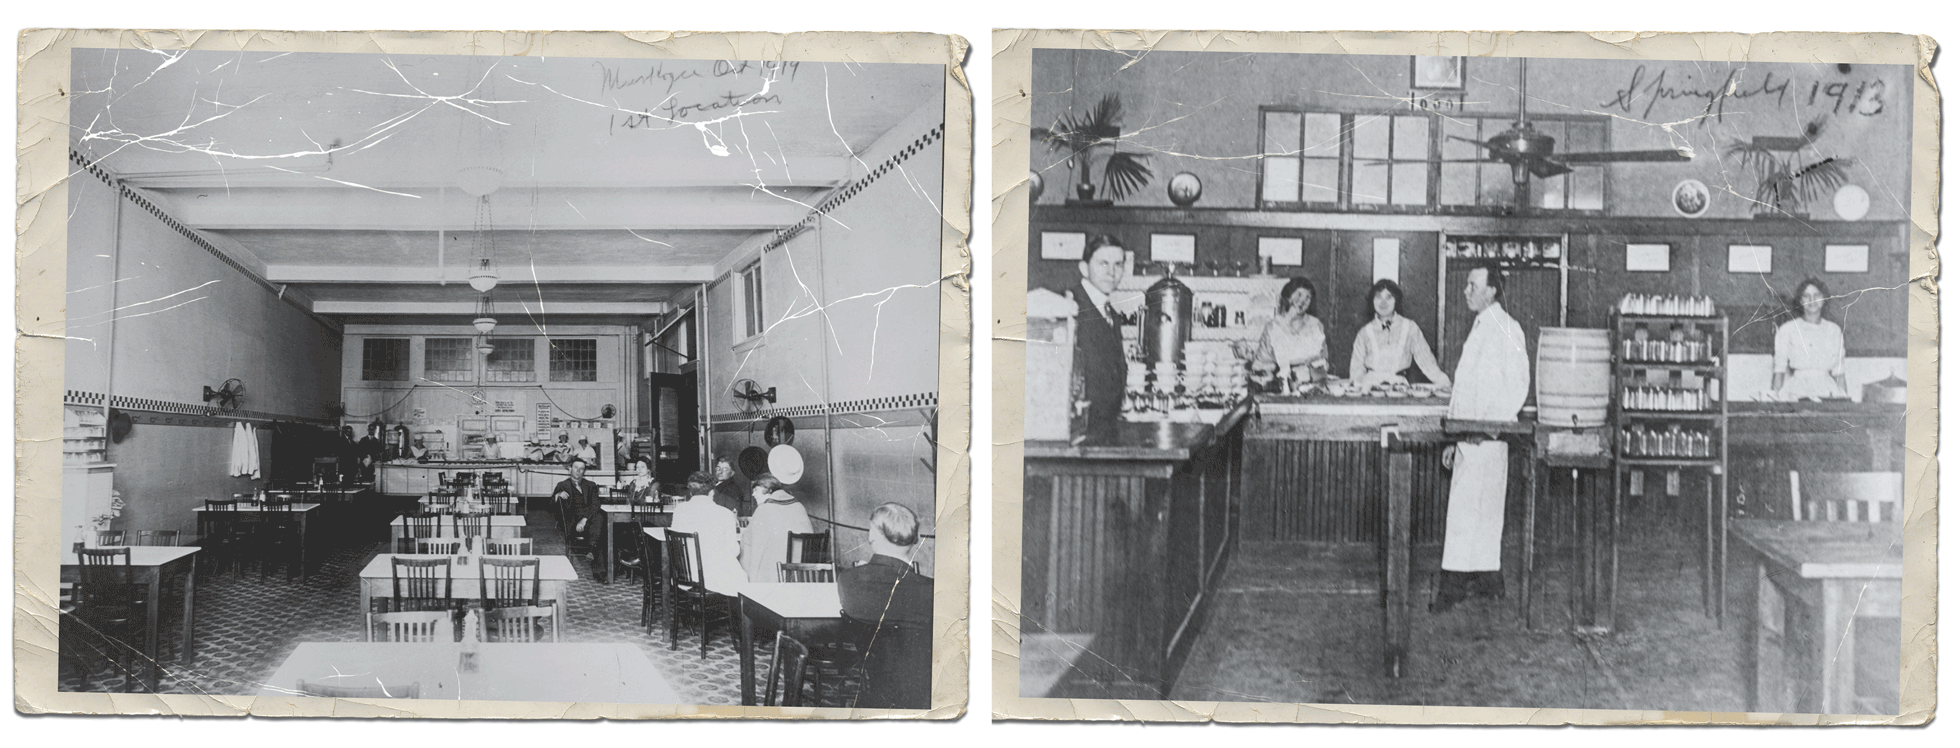 Left: Luby's began as the New England Dairy Lunch, pictured here in 1916. Right: This Springfield, Missouri, lunch counter from 1913 was typical of the time.